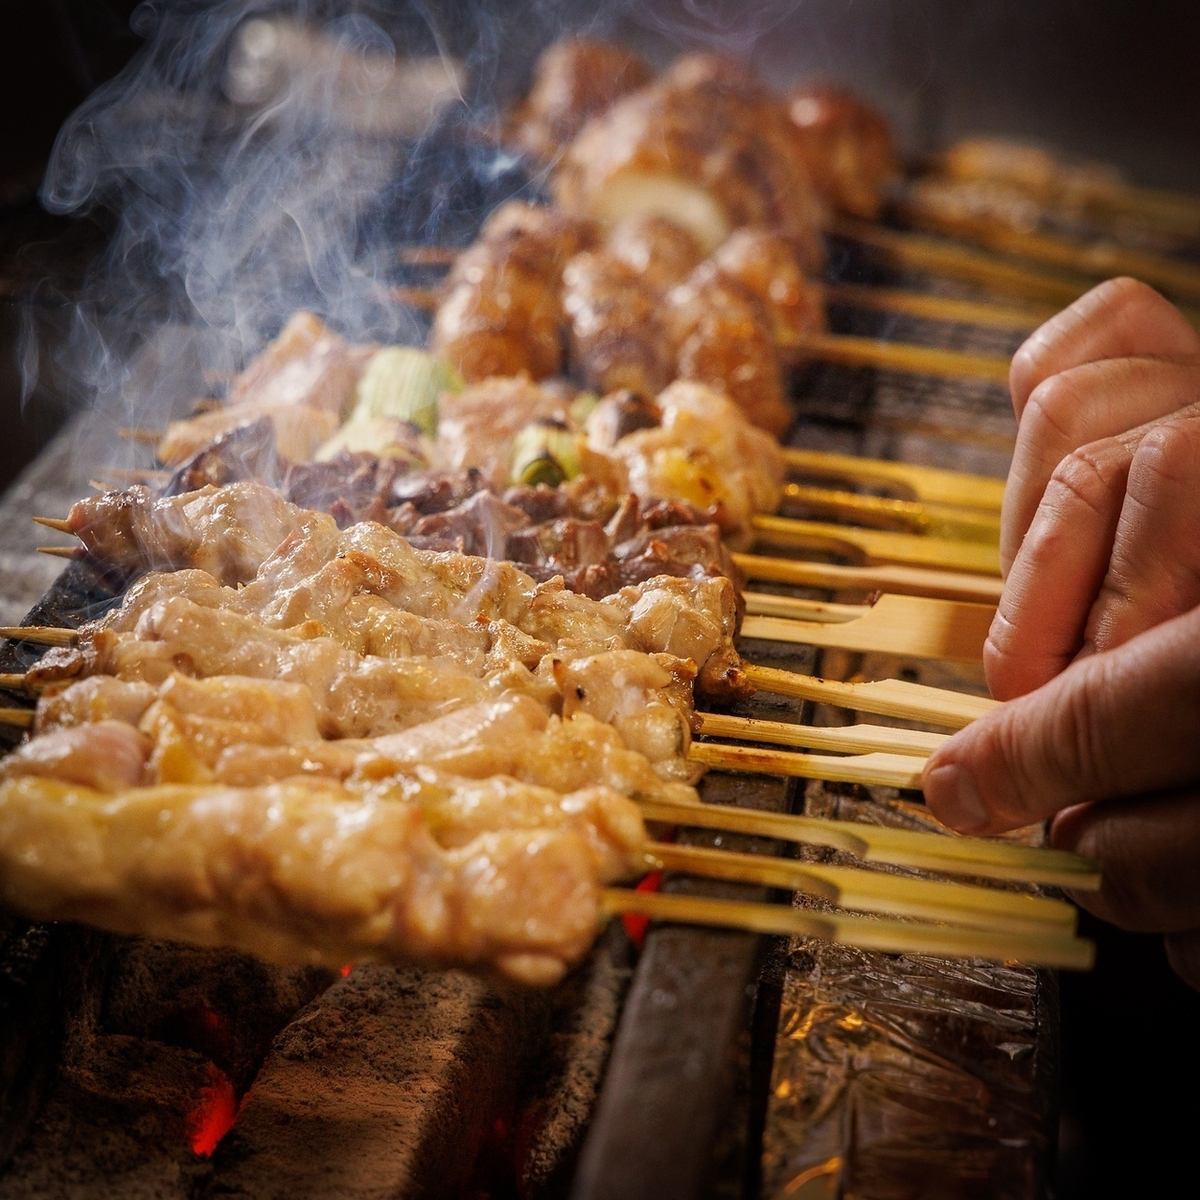 All-you-can-eat Bincho charcoal-grilled yakitori and all-you-can-drink tabletop server are very popular♪